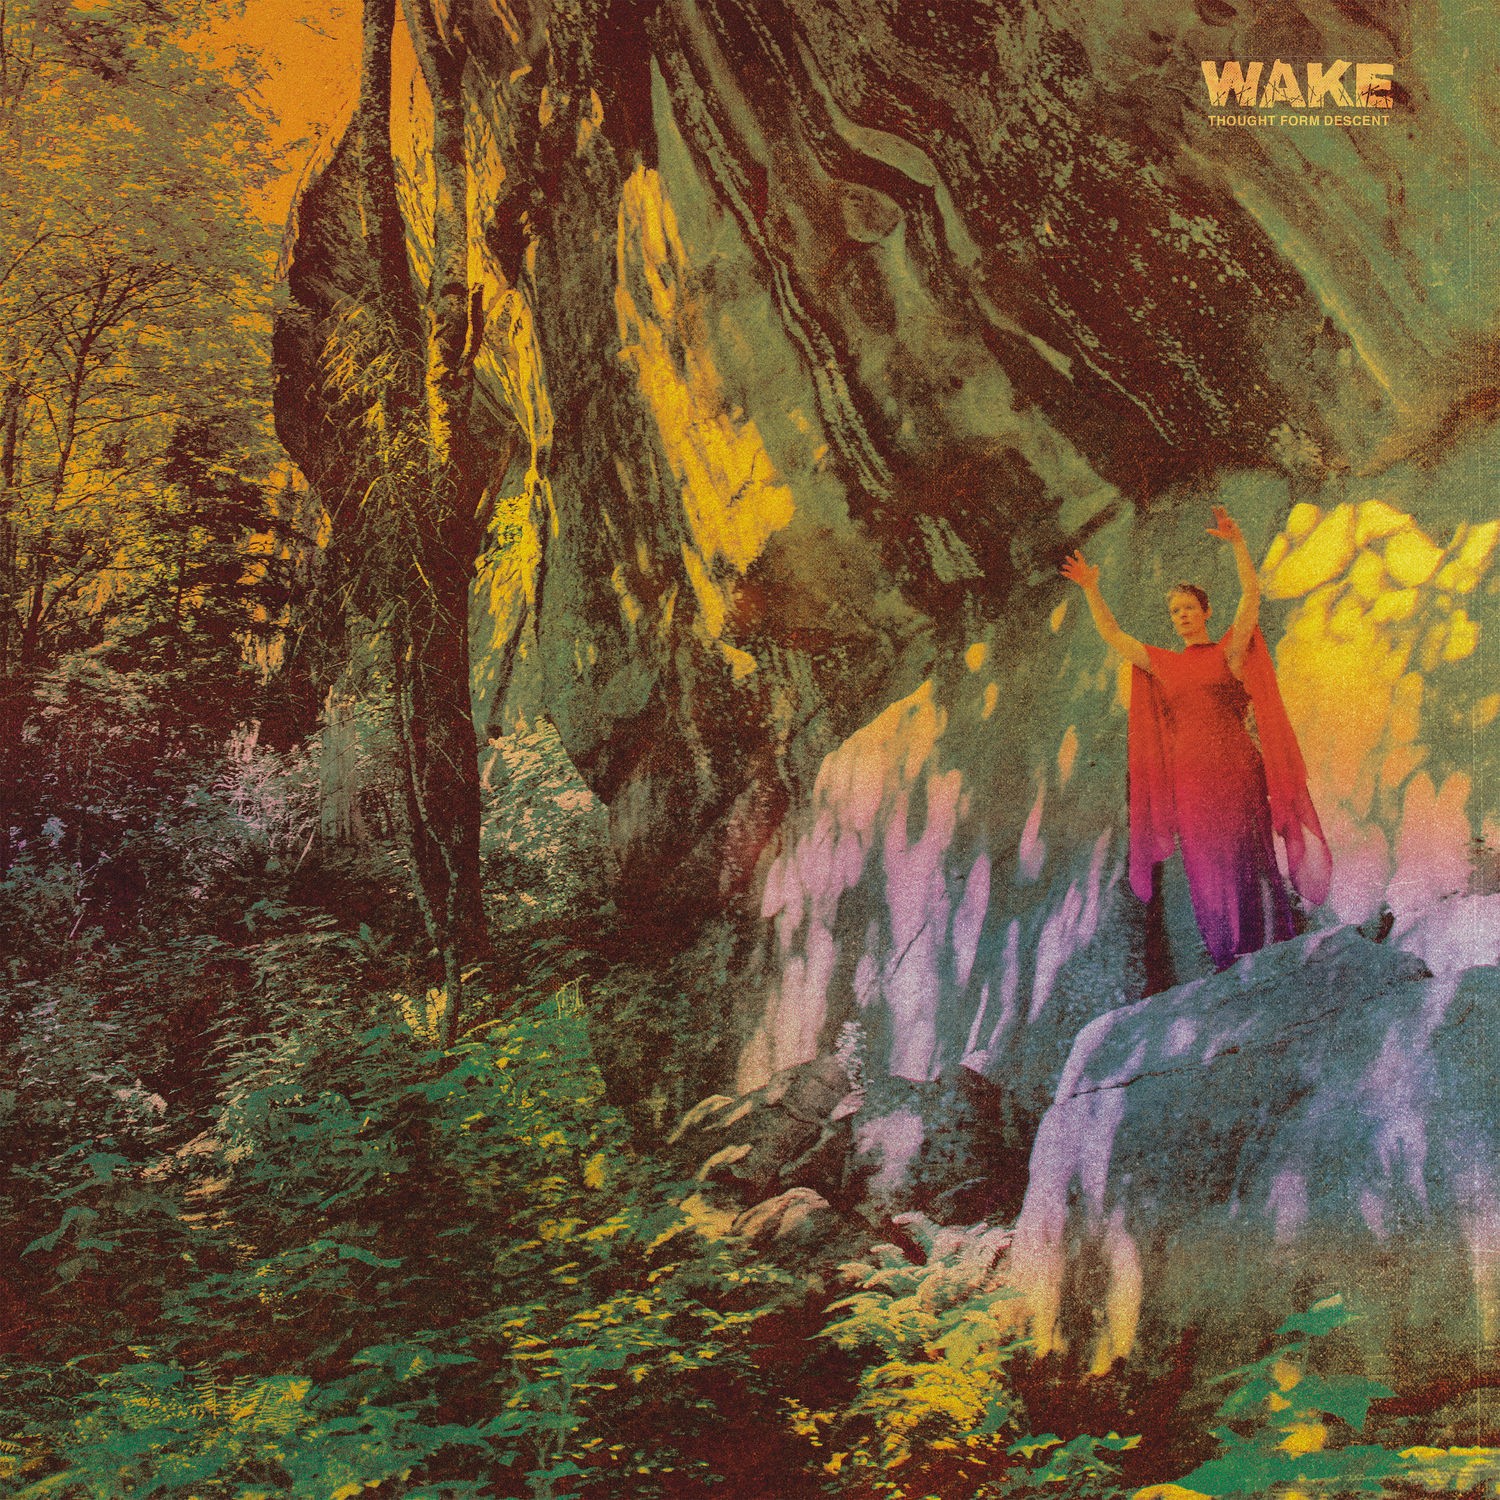 Wake – Thought Form Descent (2022) 24bit FLAC